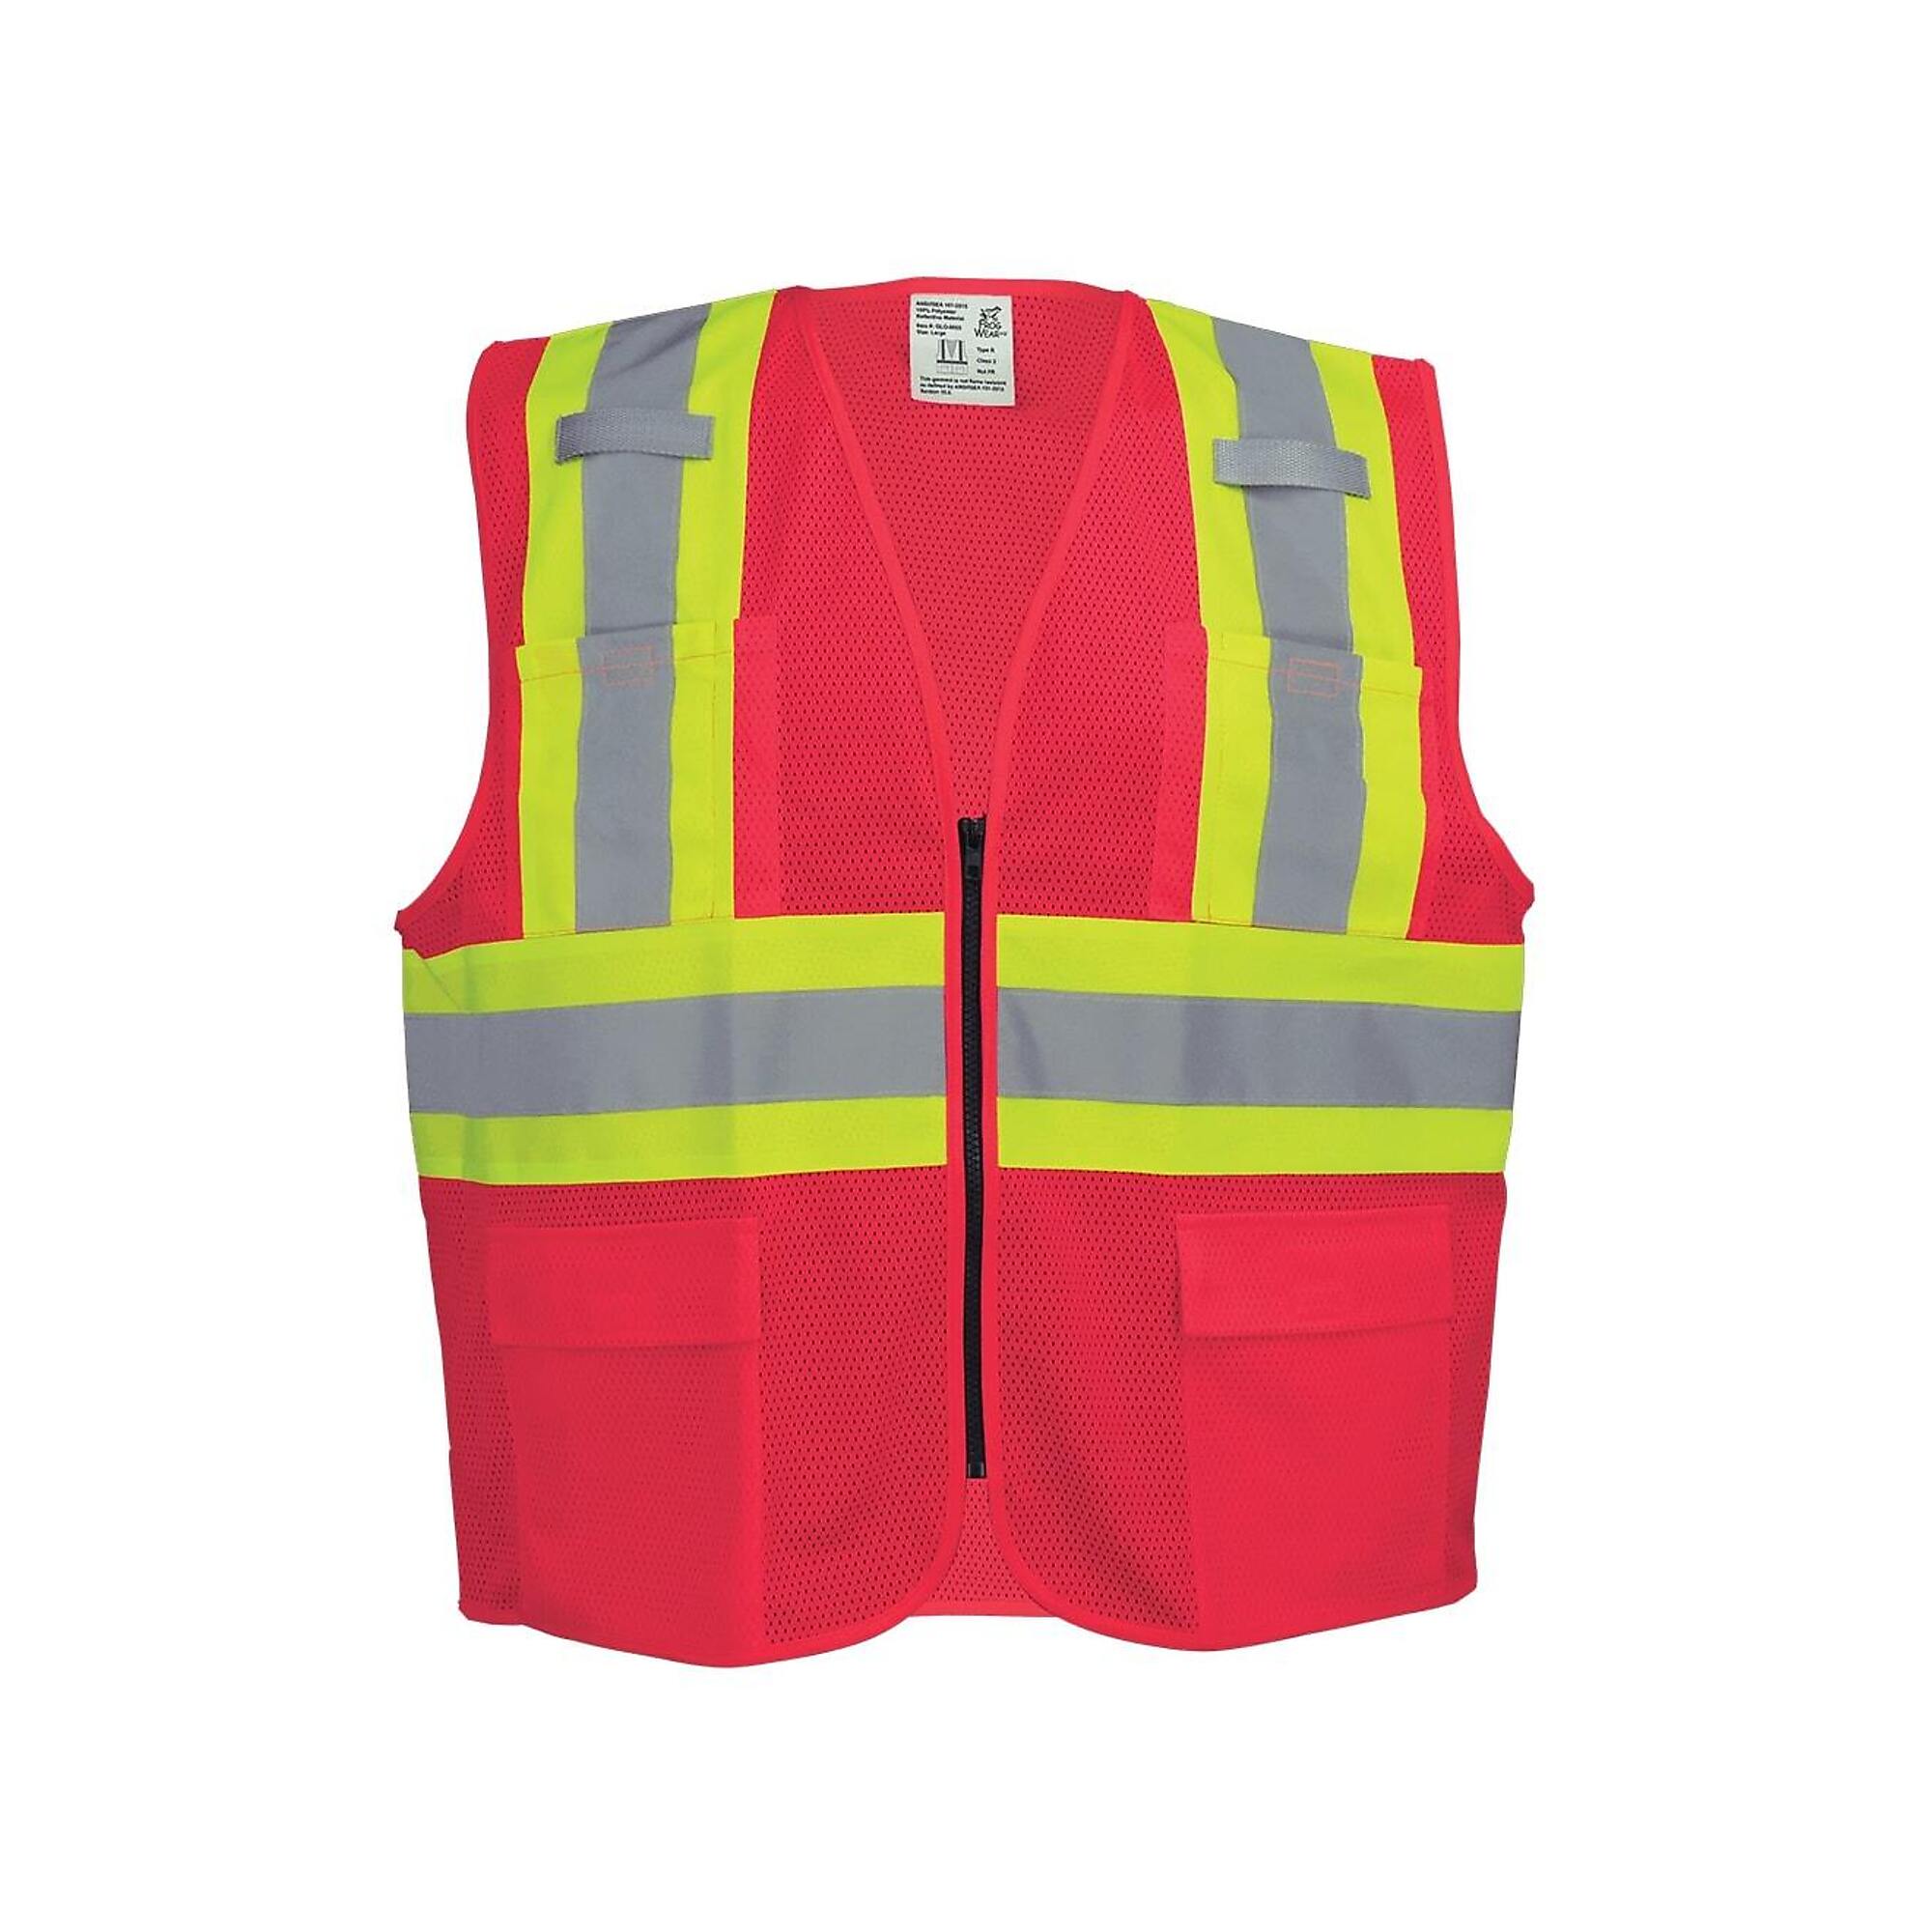 FrogWear, HV Red, Class 2 6 Pockets, Mesh Vest, Size M, Color High-Visibility Red, Model GLO-0055-M